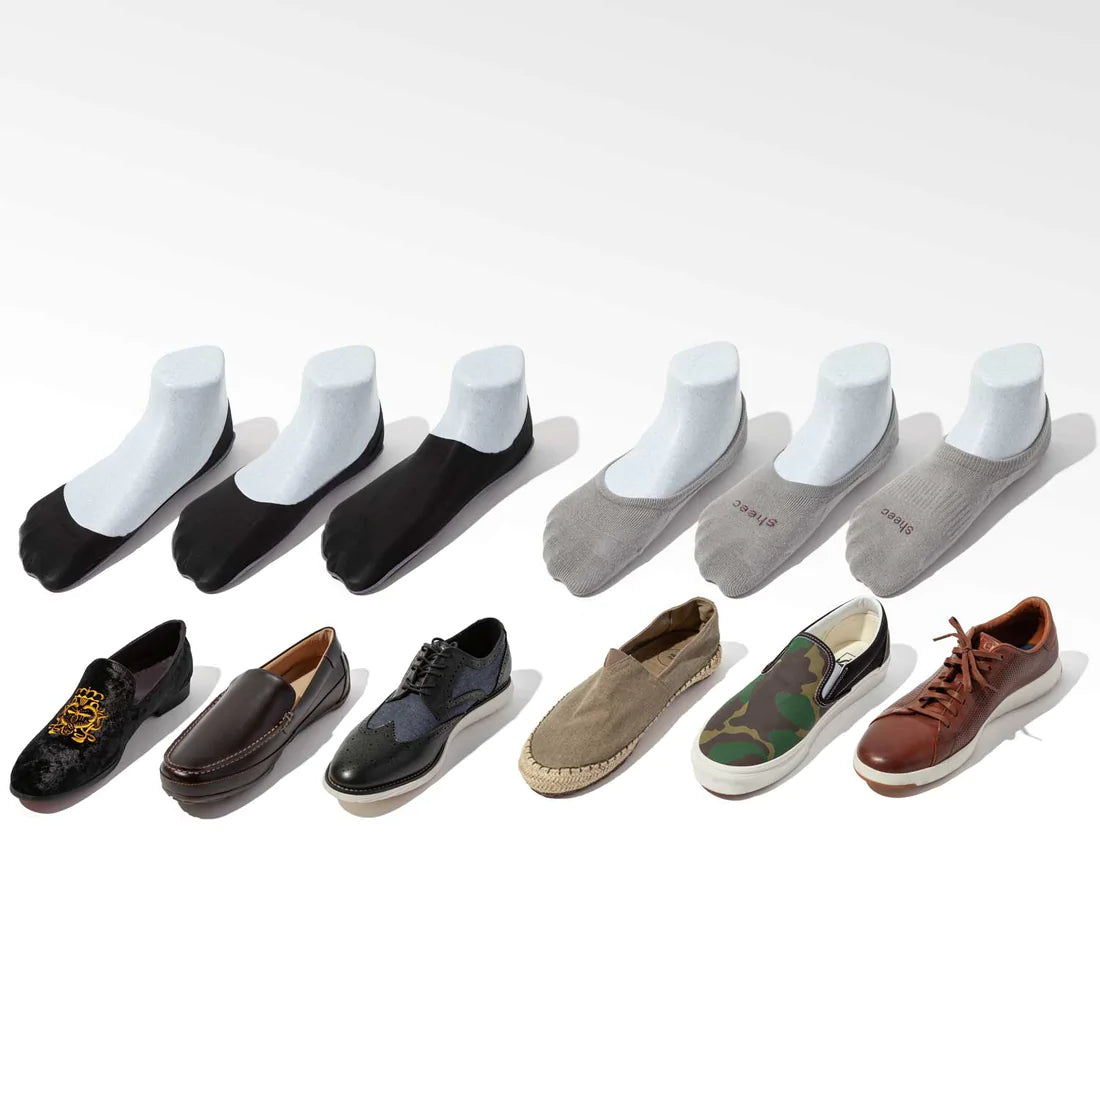 Wholesale japan five toe socks In A Range Of Cuts And Colors For Every Shoe  